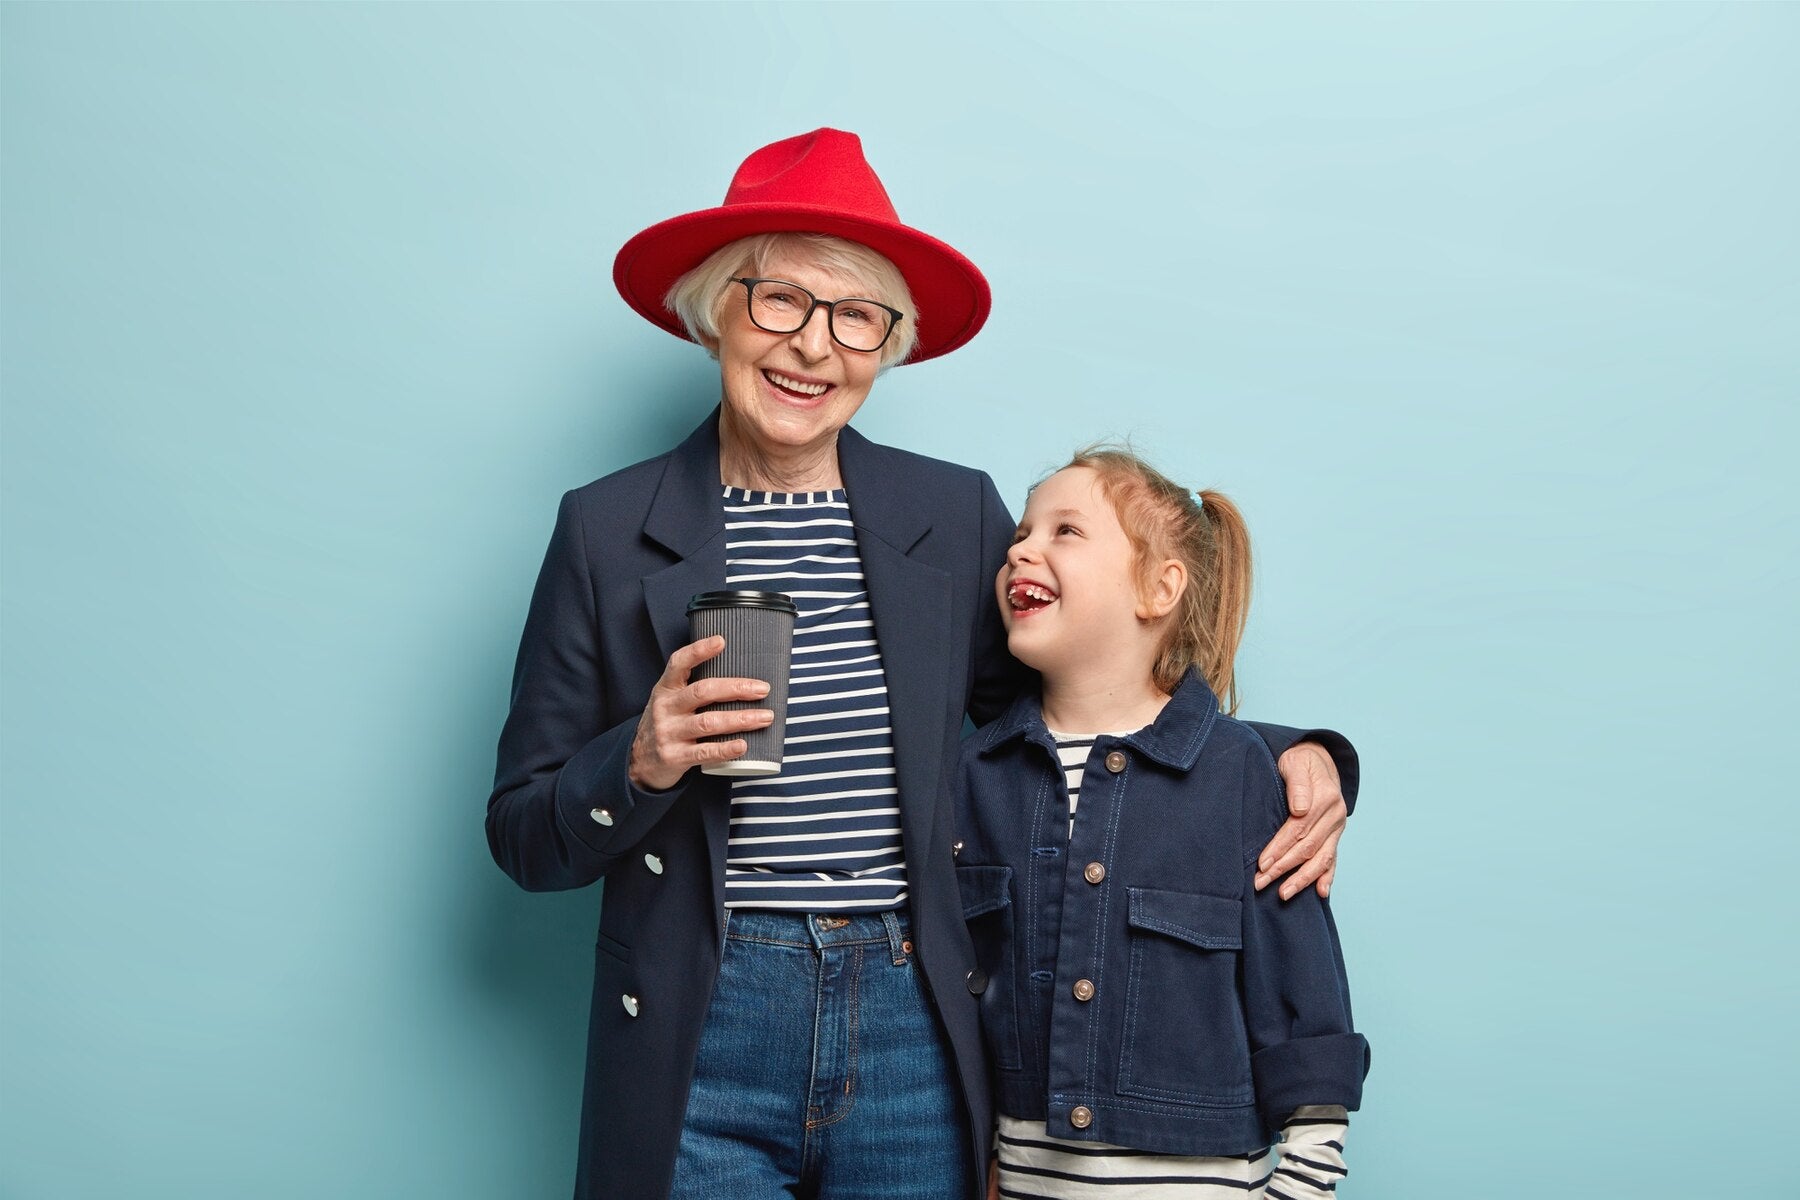 portrait-happy-fashionable-granny-small-cute-child-spend-spare-time-together-drinks-takeaway-coffee-cuddle-have-friendly-relationships-wear-denim-clothes-stand-blue-wall_273609-26791